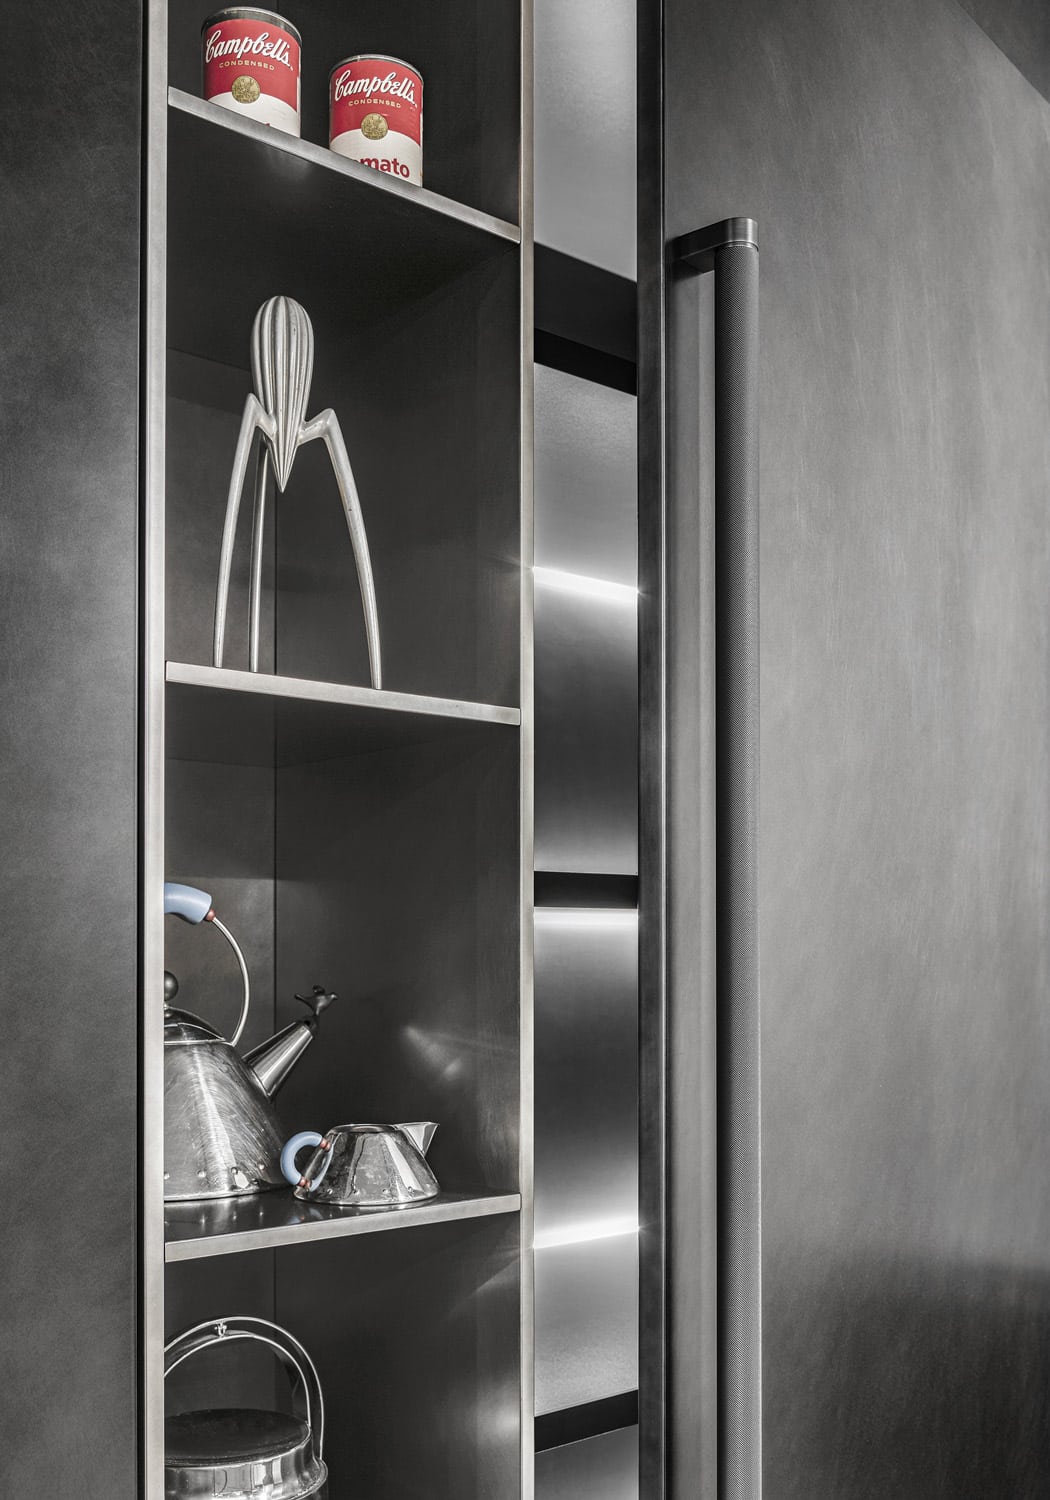 The open niches are in the same lacquered Oxidized Metal Steel finish as the rest of the tall units, creating a very contemporary look.